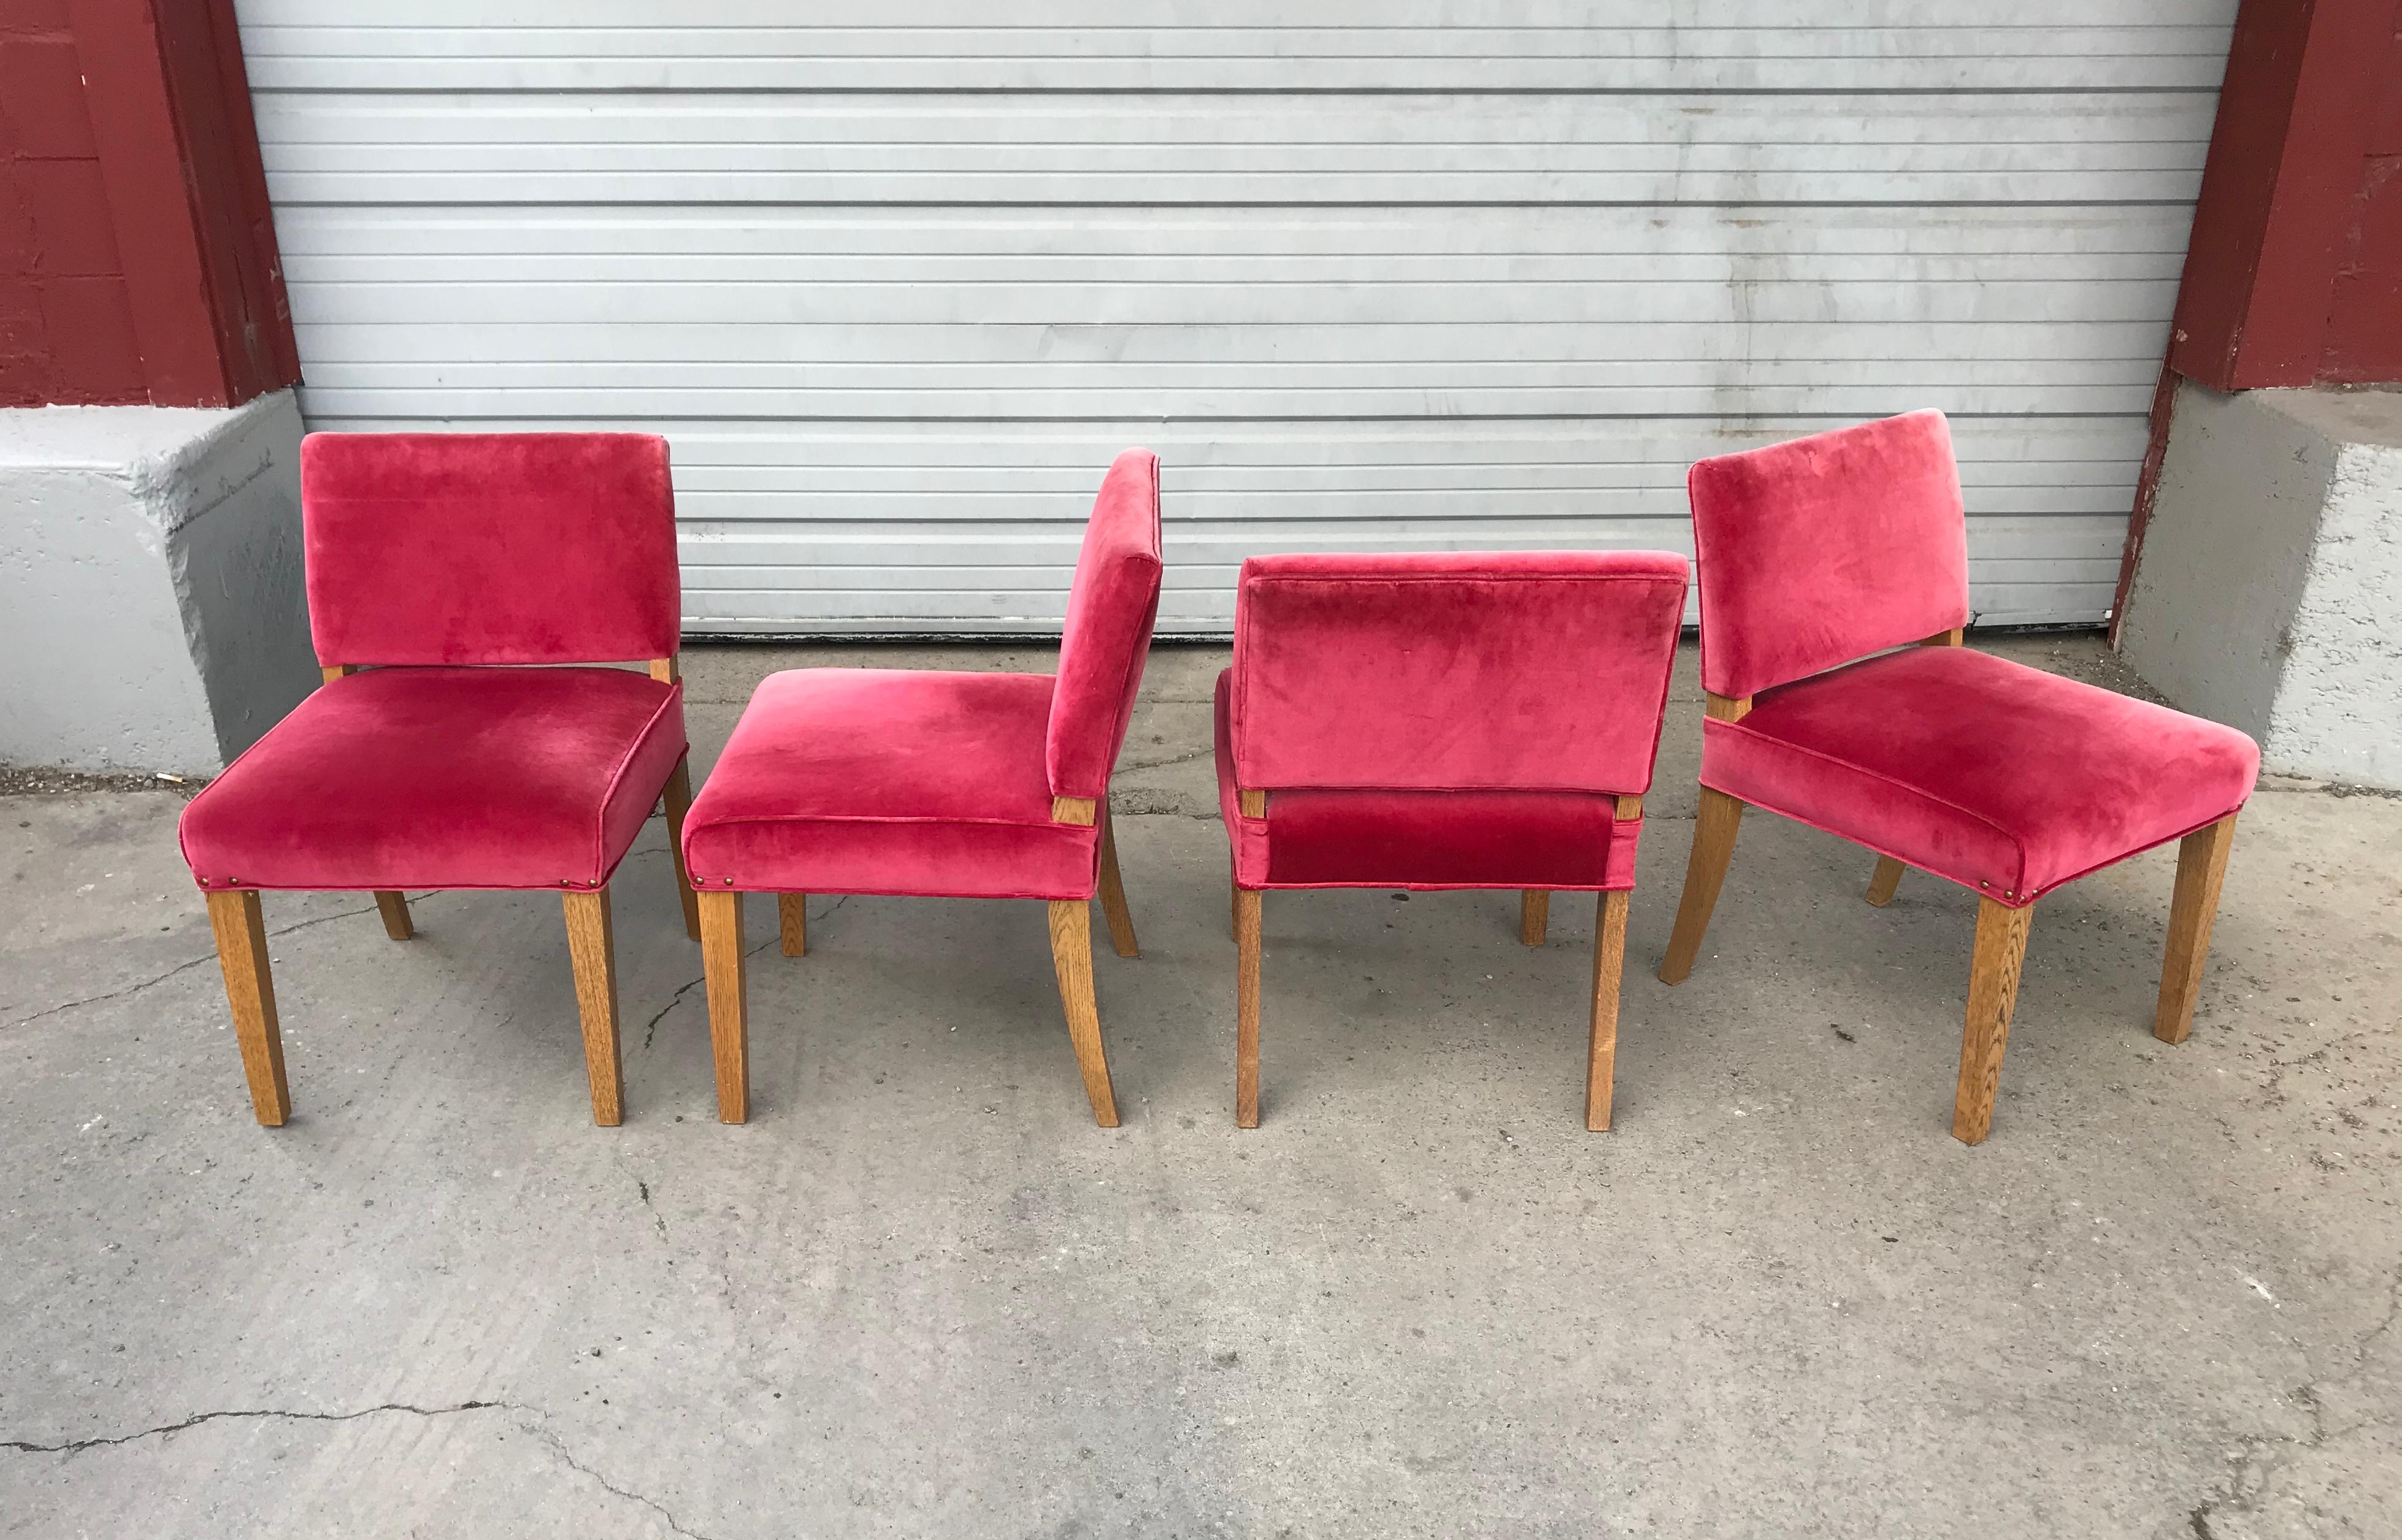 Set of 4 Modernist side chairs, dining, occasional attributed to Red Lion Furniture Co. Handsome set of four side chairs, recently upholstered in a salmon / pink mohair, Great quality and construction, Simple, elegant design. Perfect for dining,